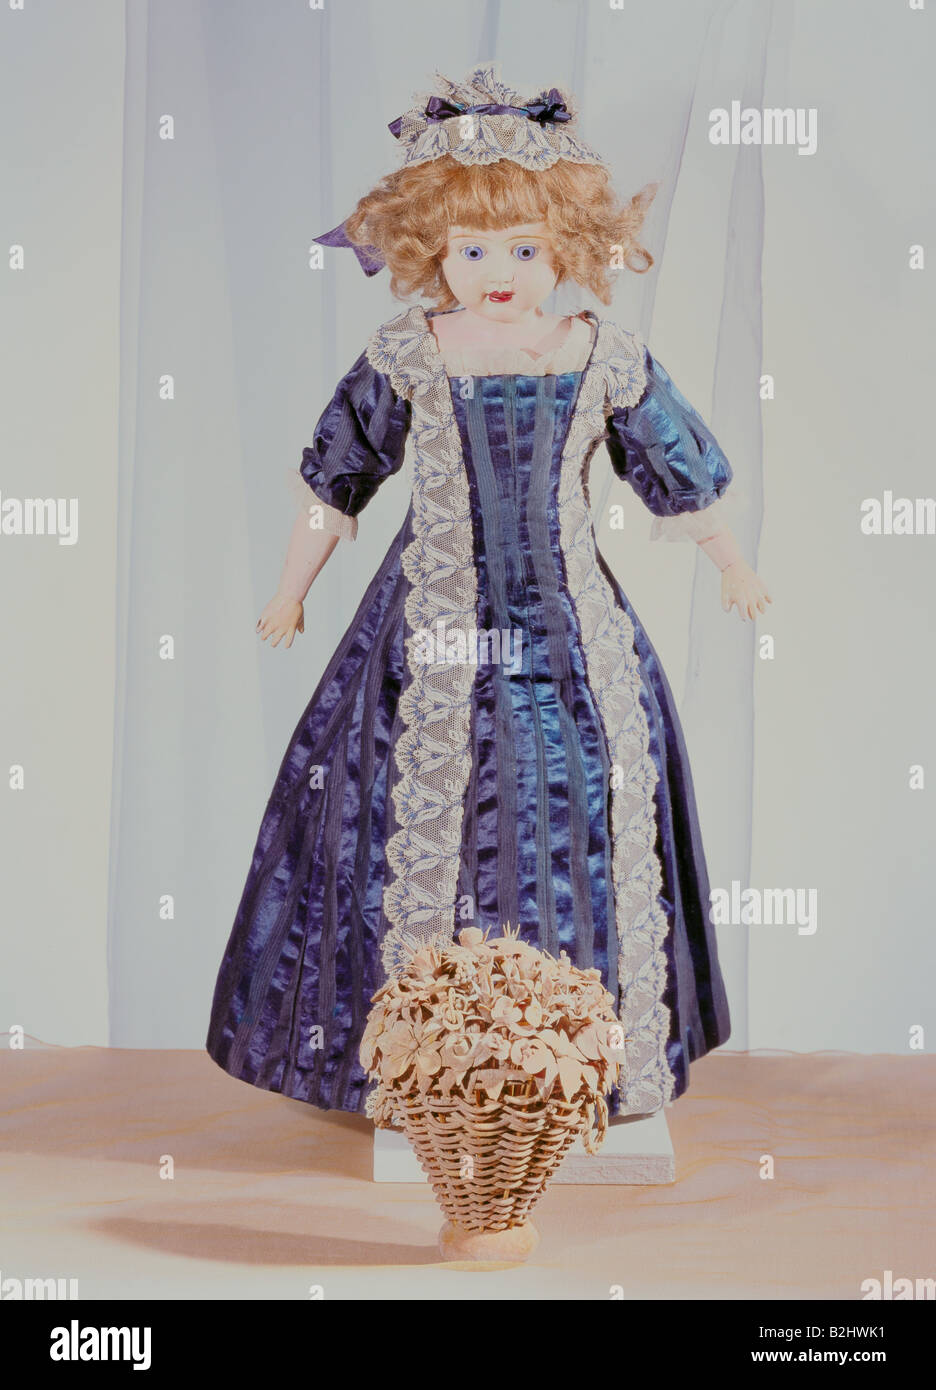 toys, dolls, jointed doll, celluloid, leather, wood, clothes, height 55 cm, Reichenbach, Silesia, Germany, circa 1900, Stock Photo